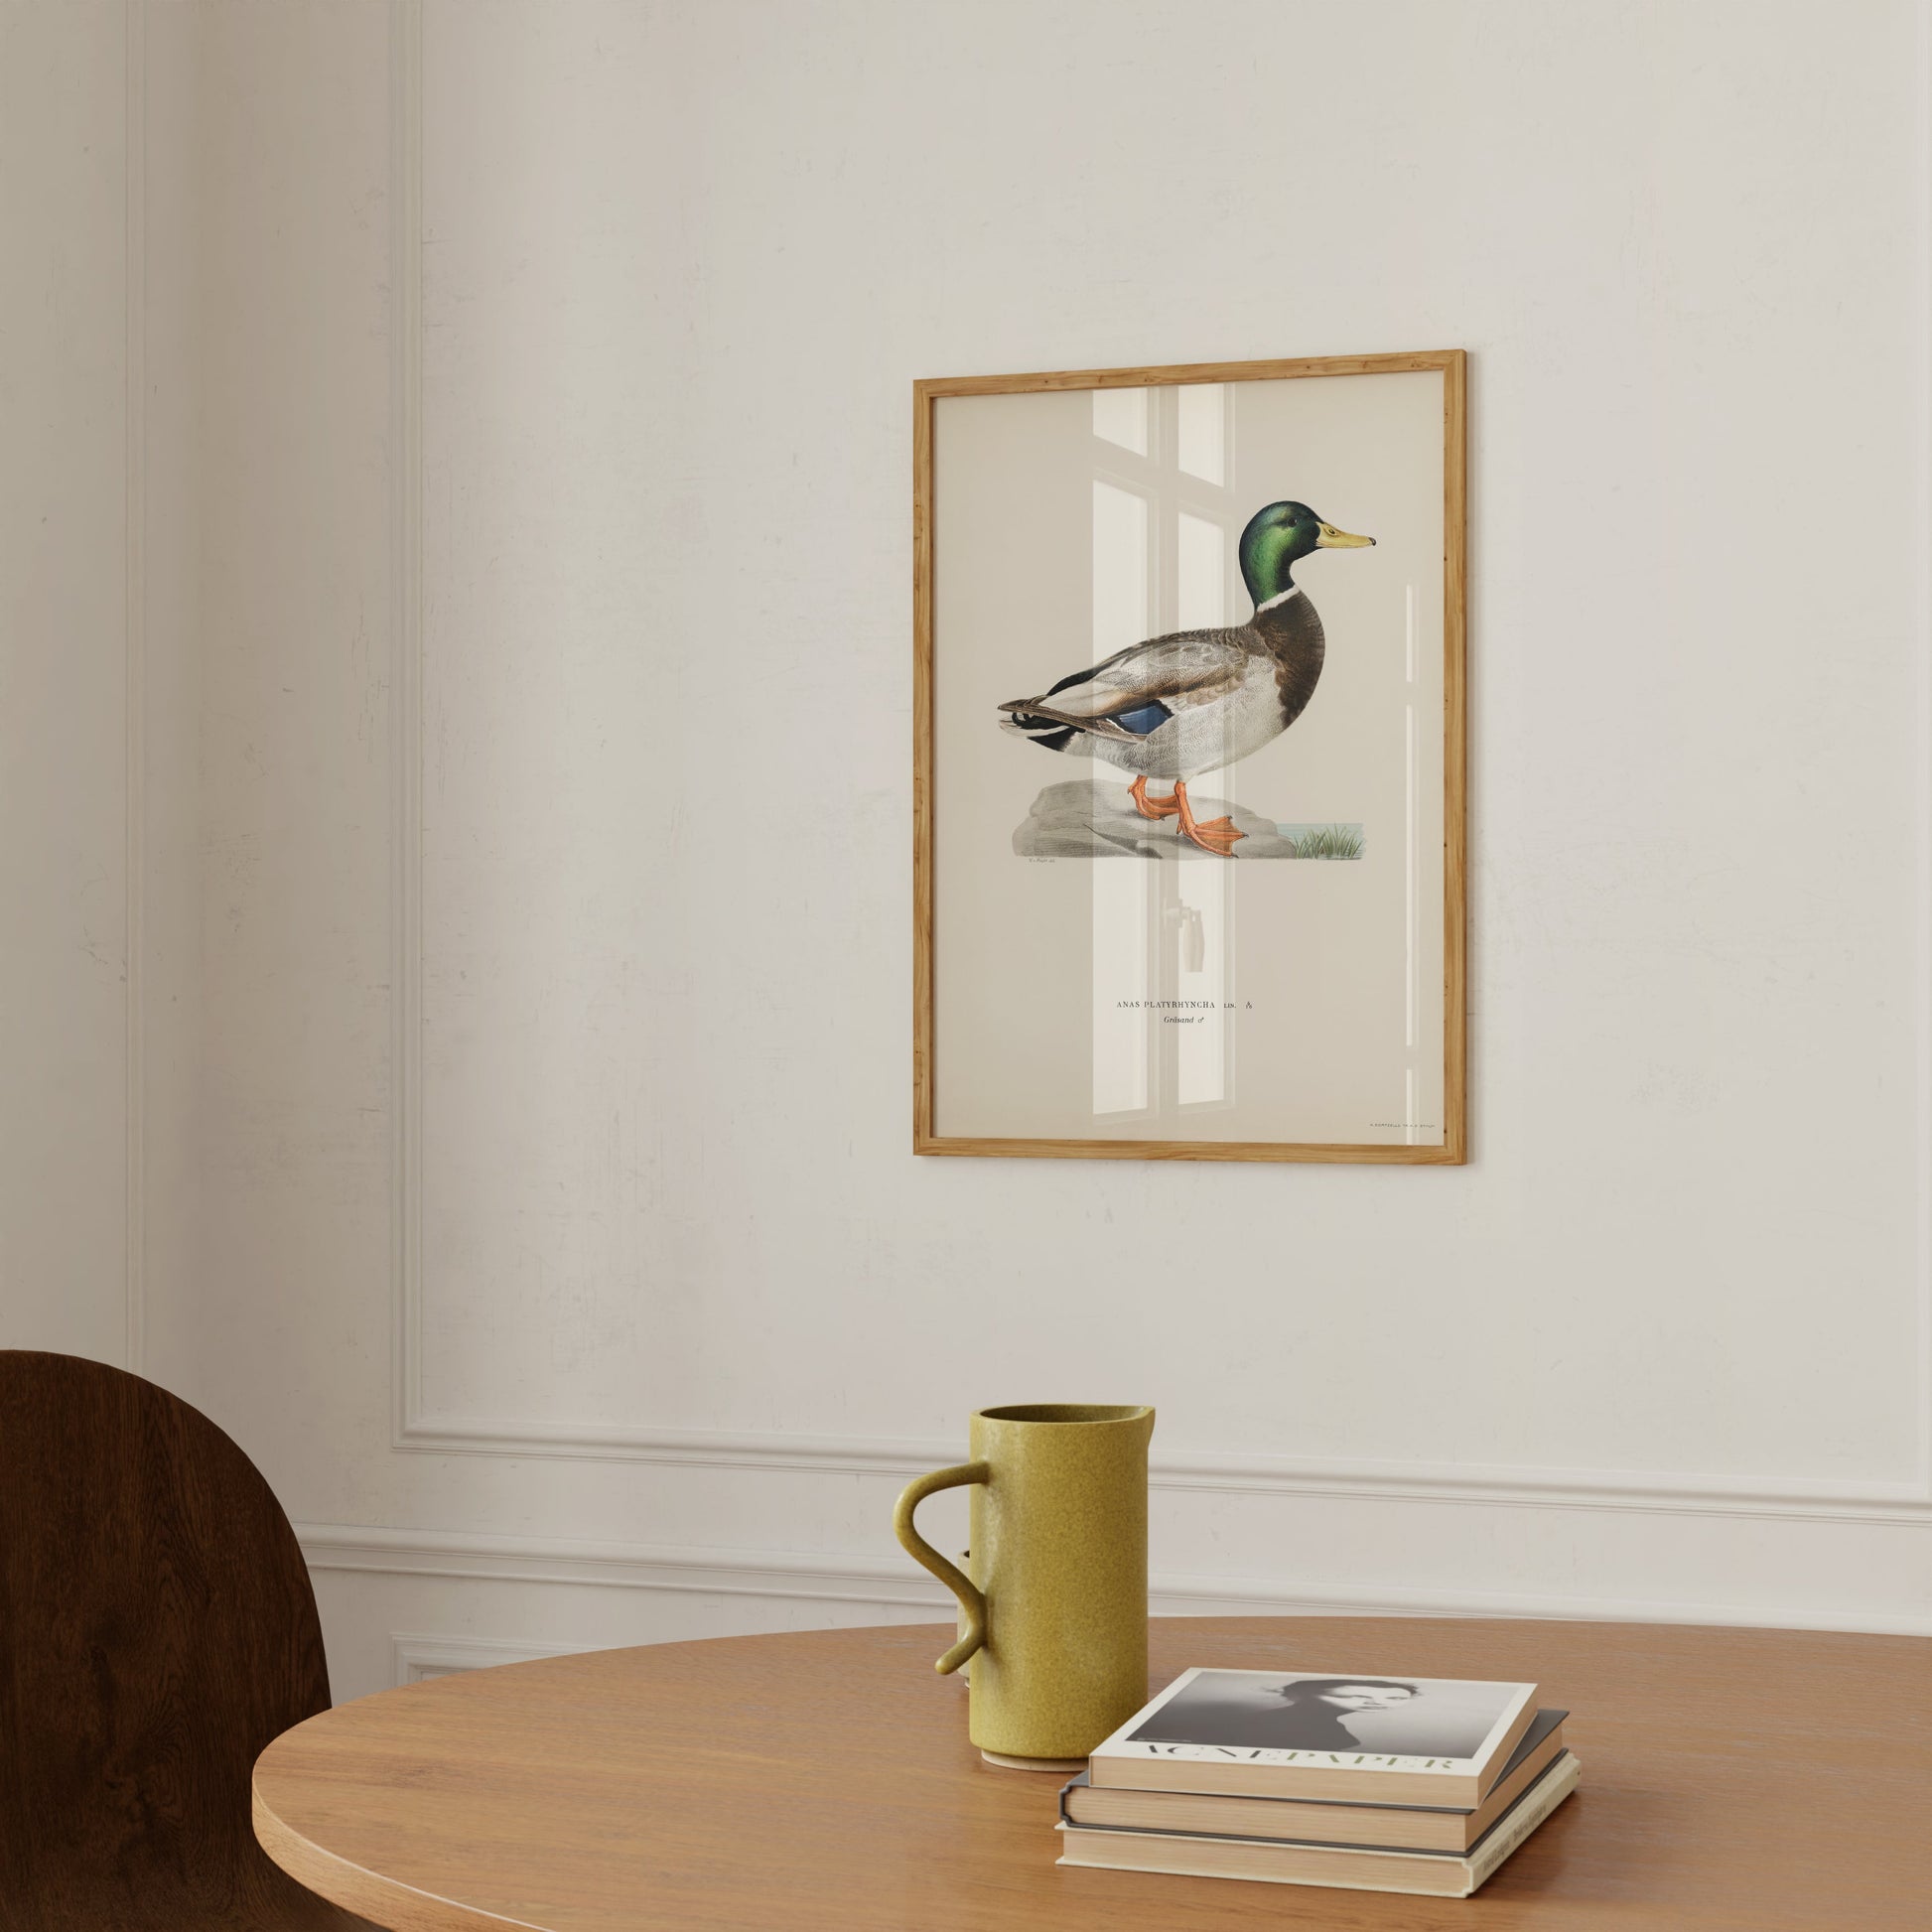 a picture of a duck on a wall above a table